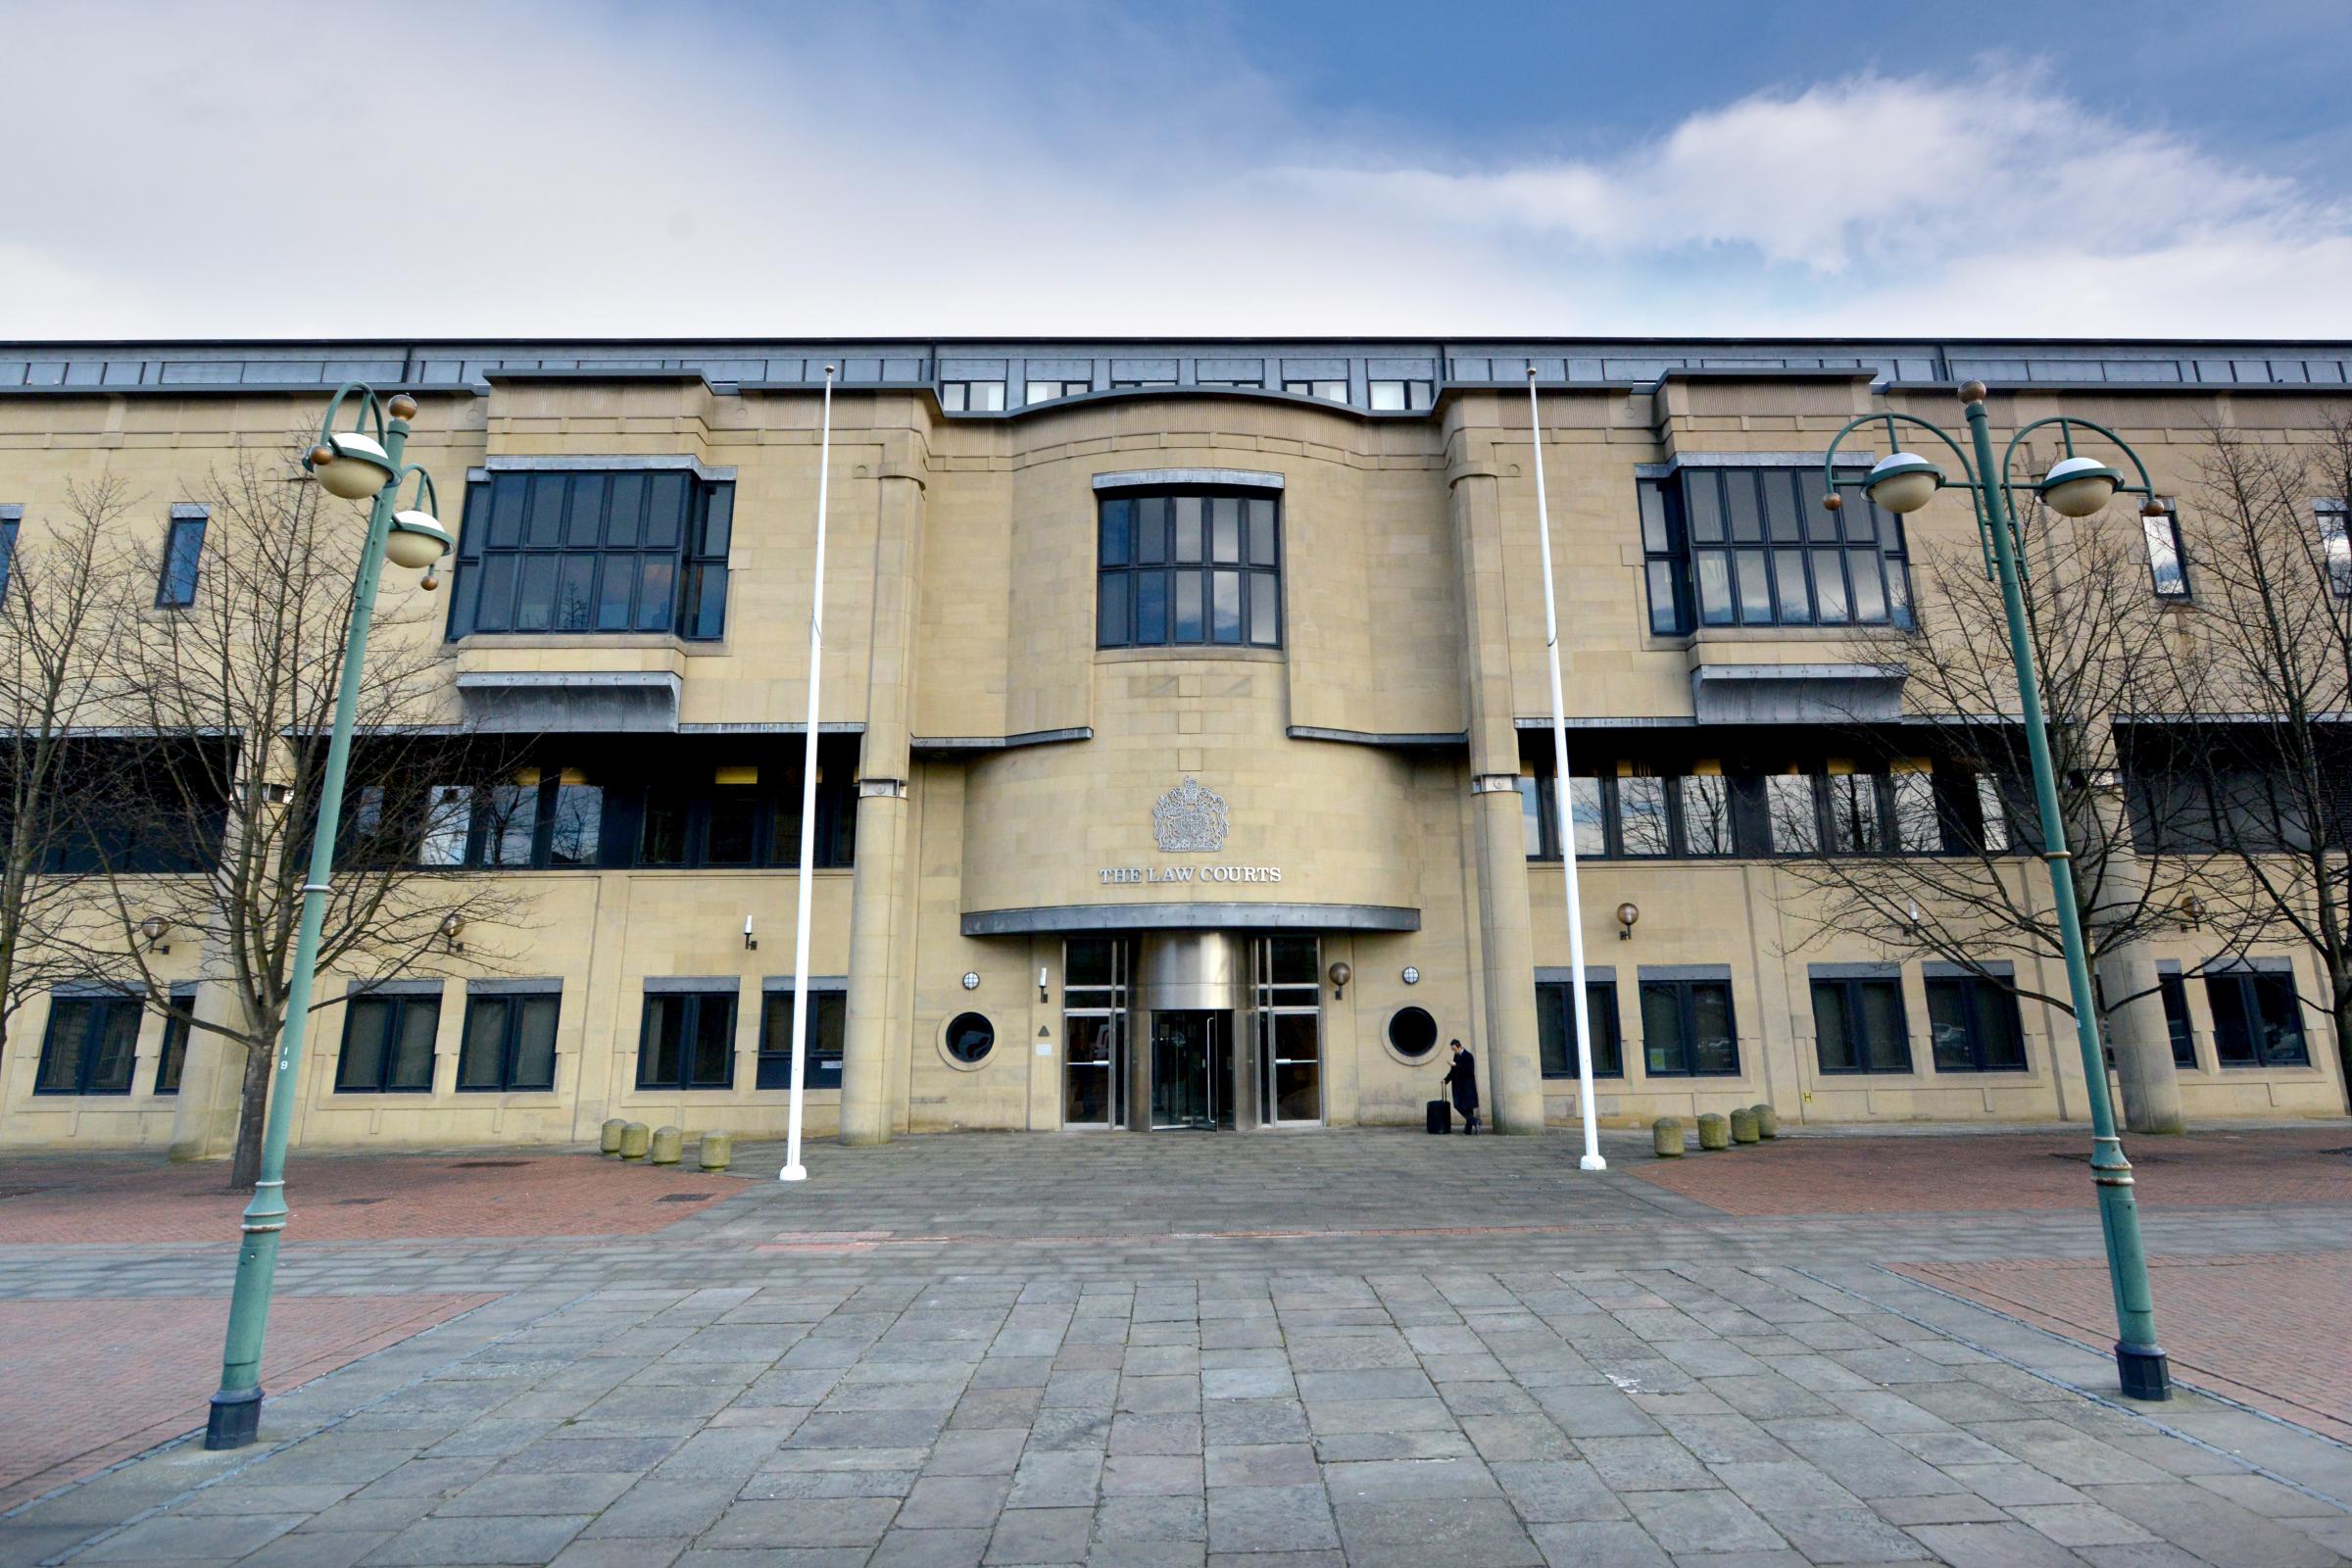 Burglar jailed after being caught red-handed at Bradford house